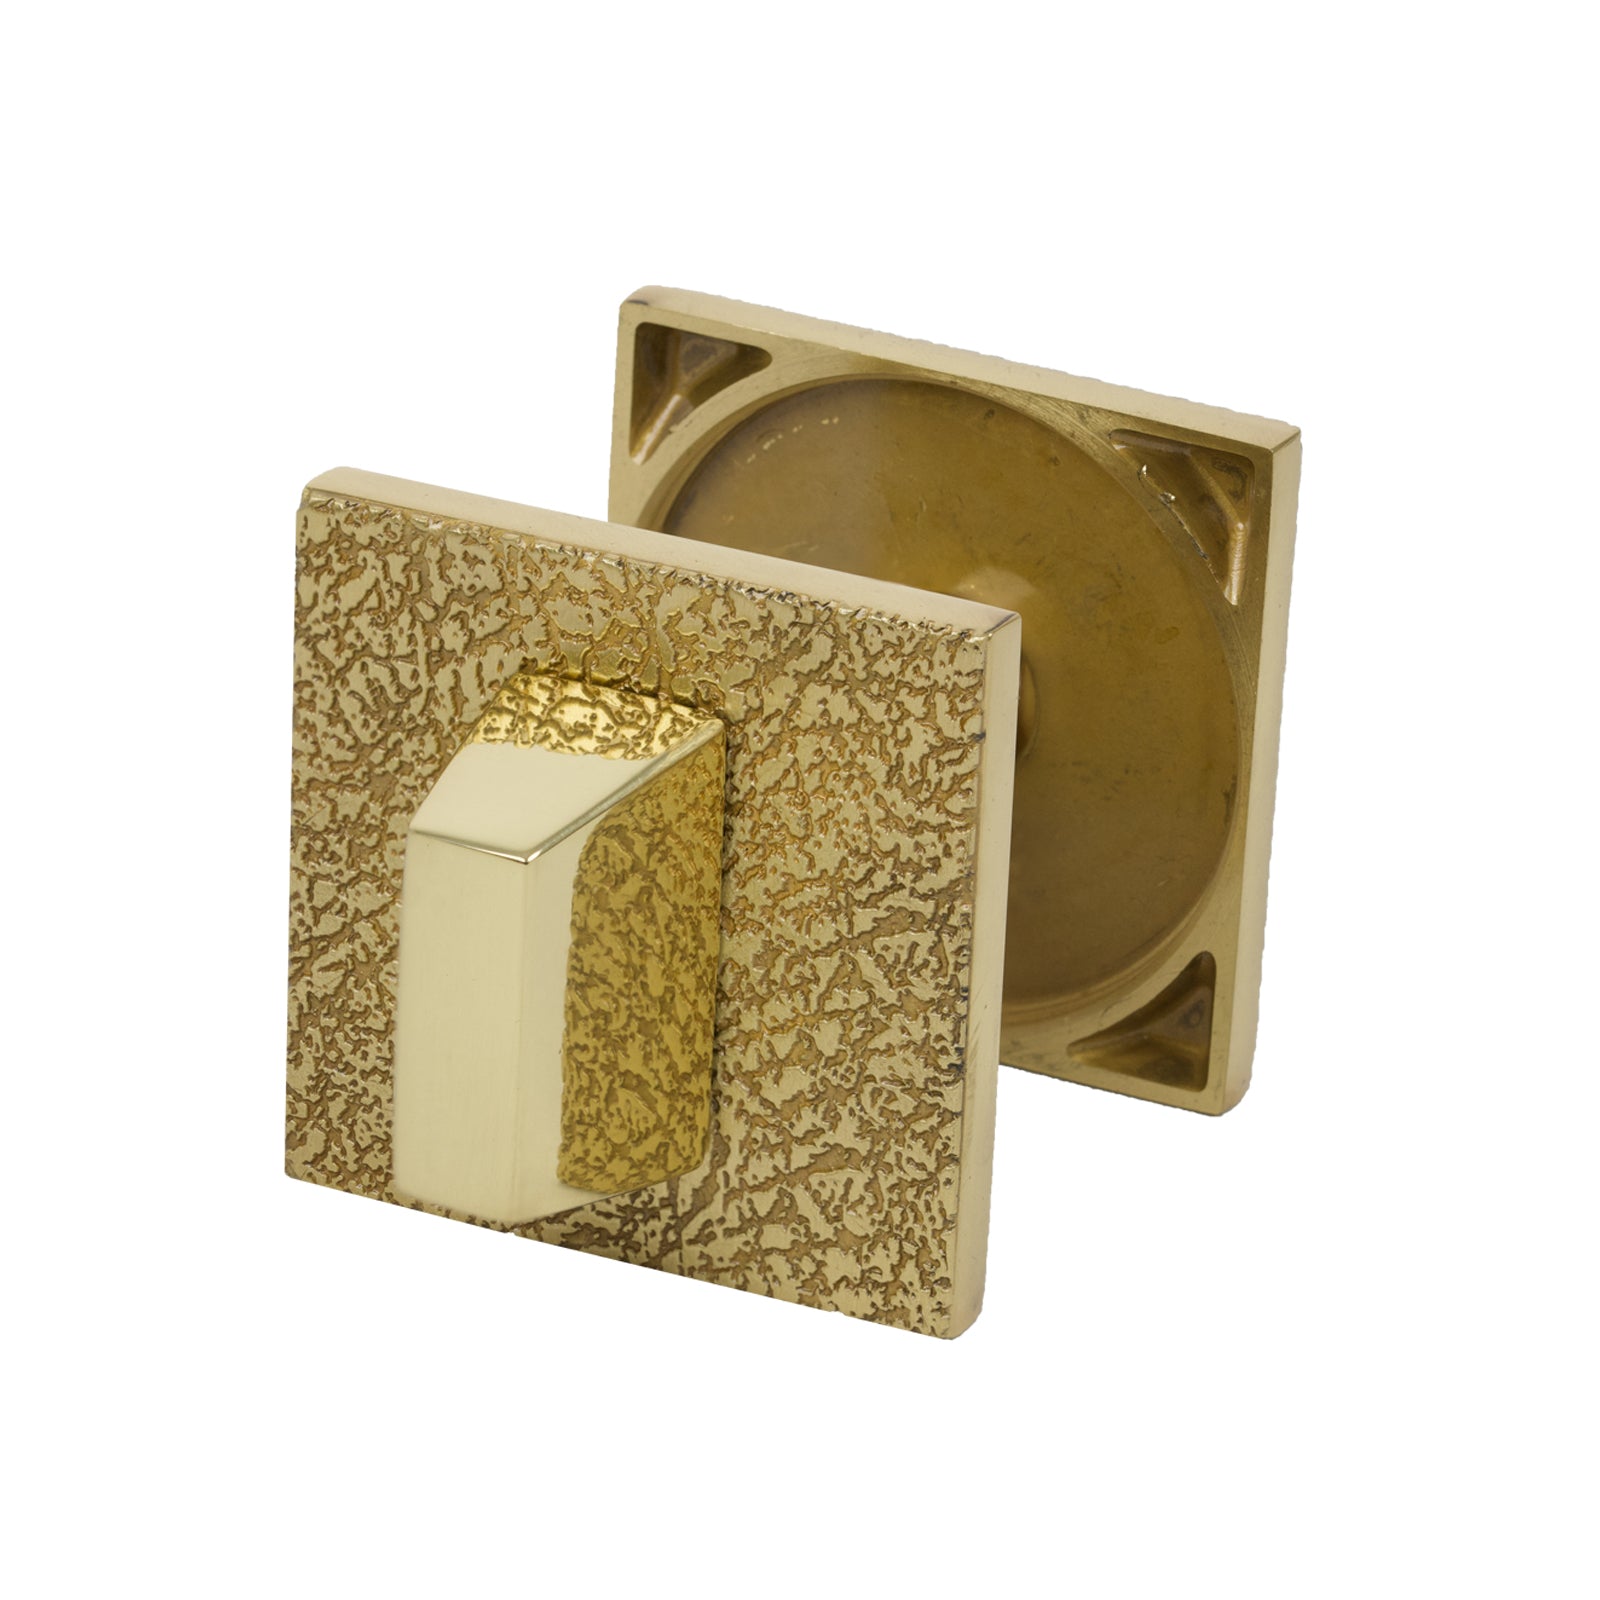 Tupai bathroom turn and release in Polished/Satin Brass Finish SHOW